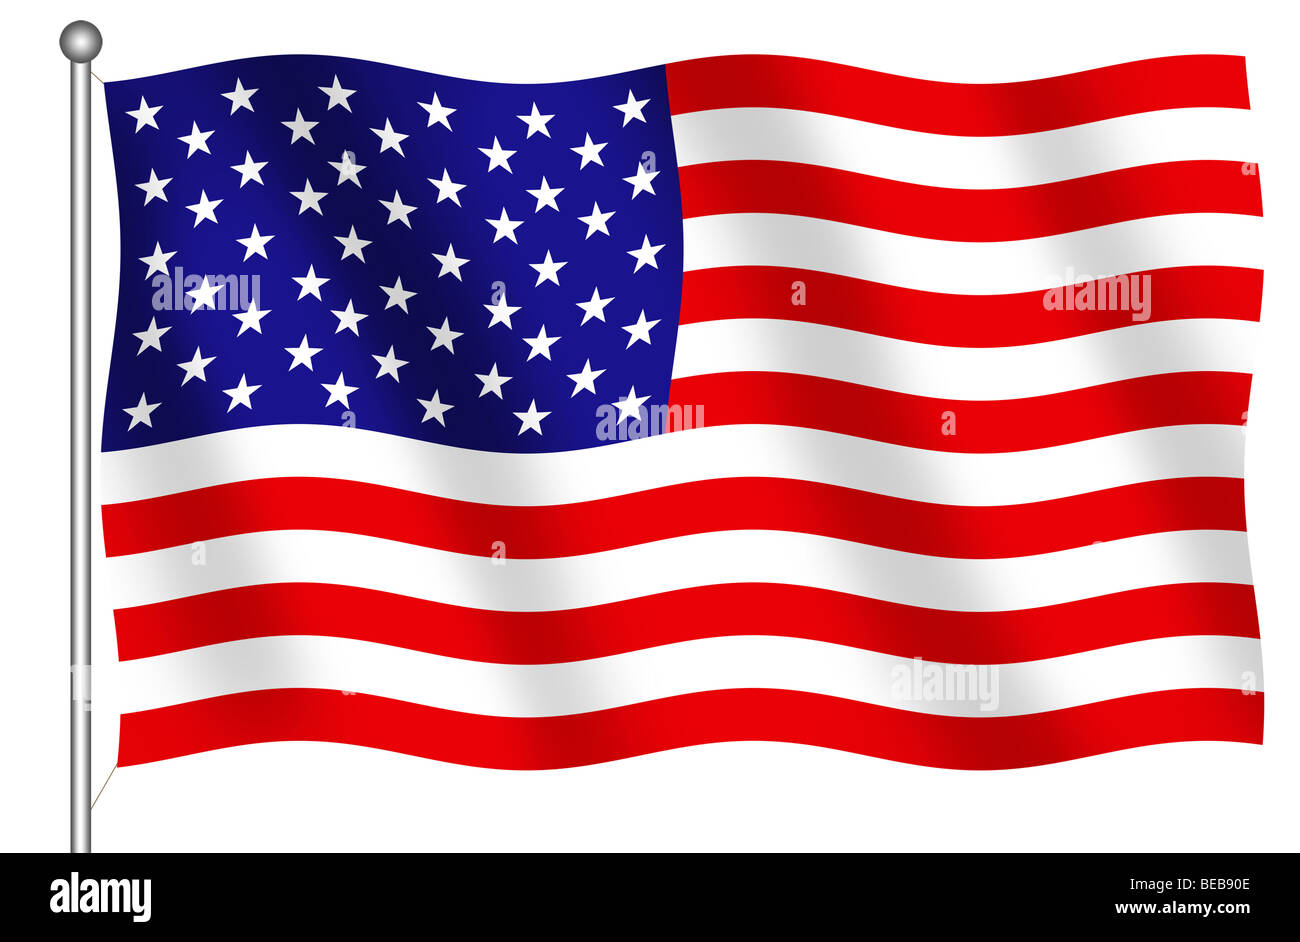 Computer generated illustration of the flag of the united States of America Stock Photo